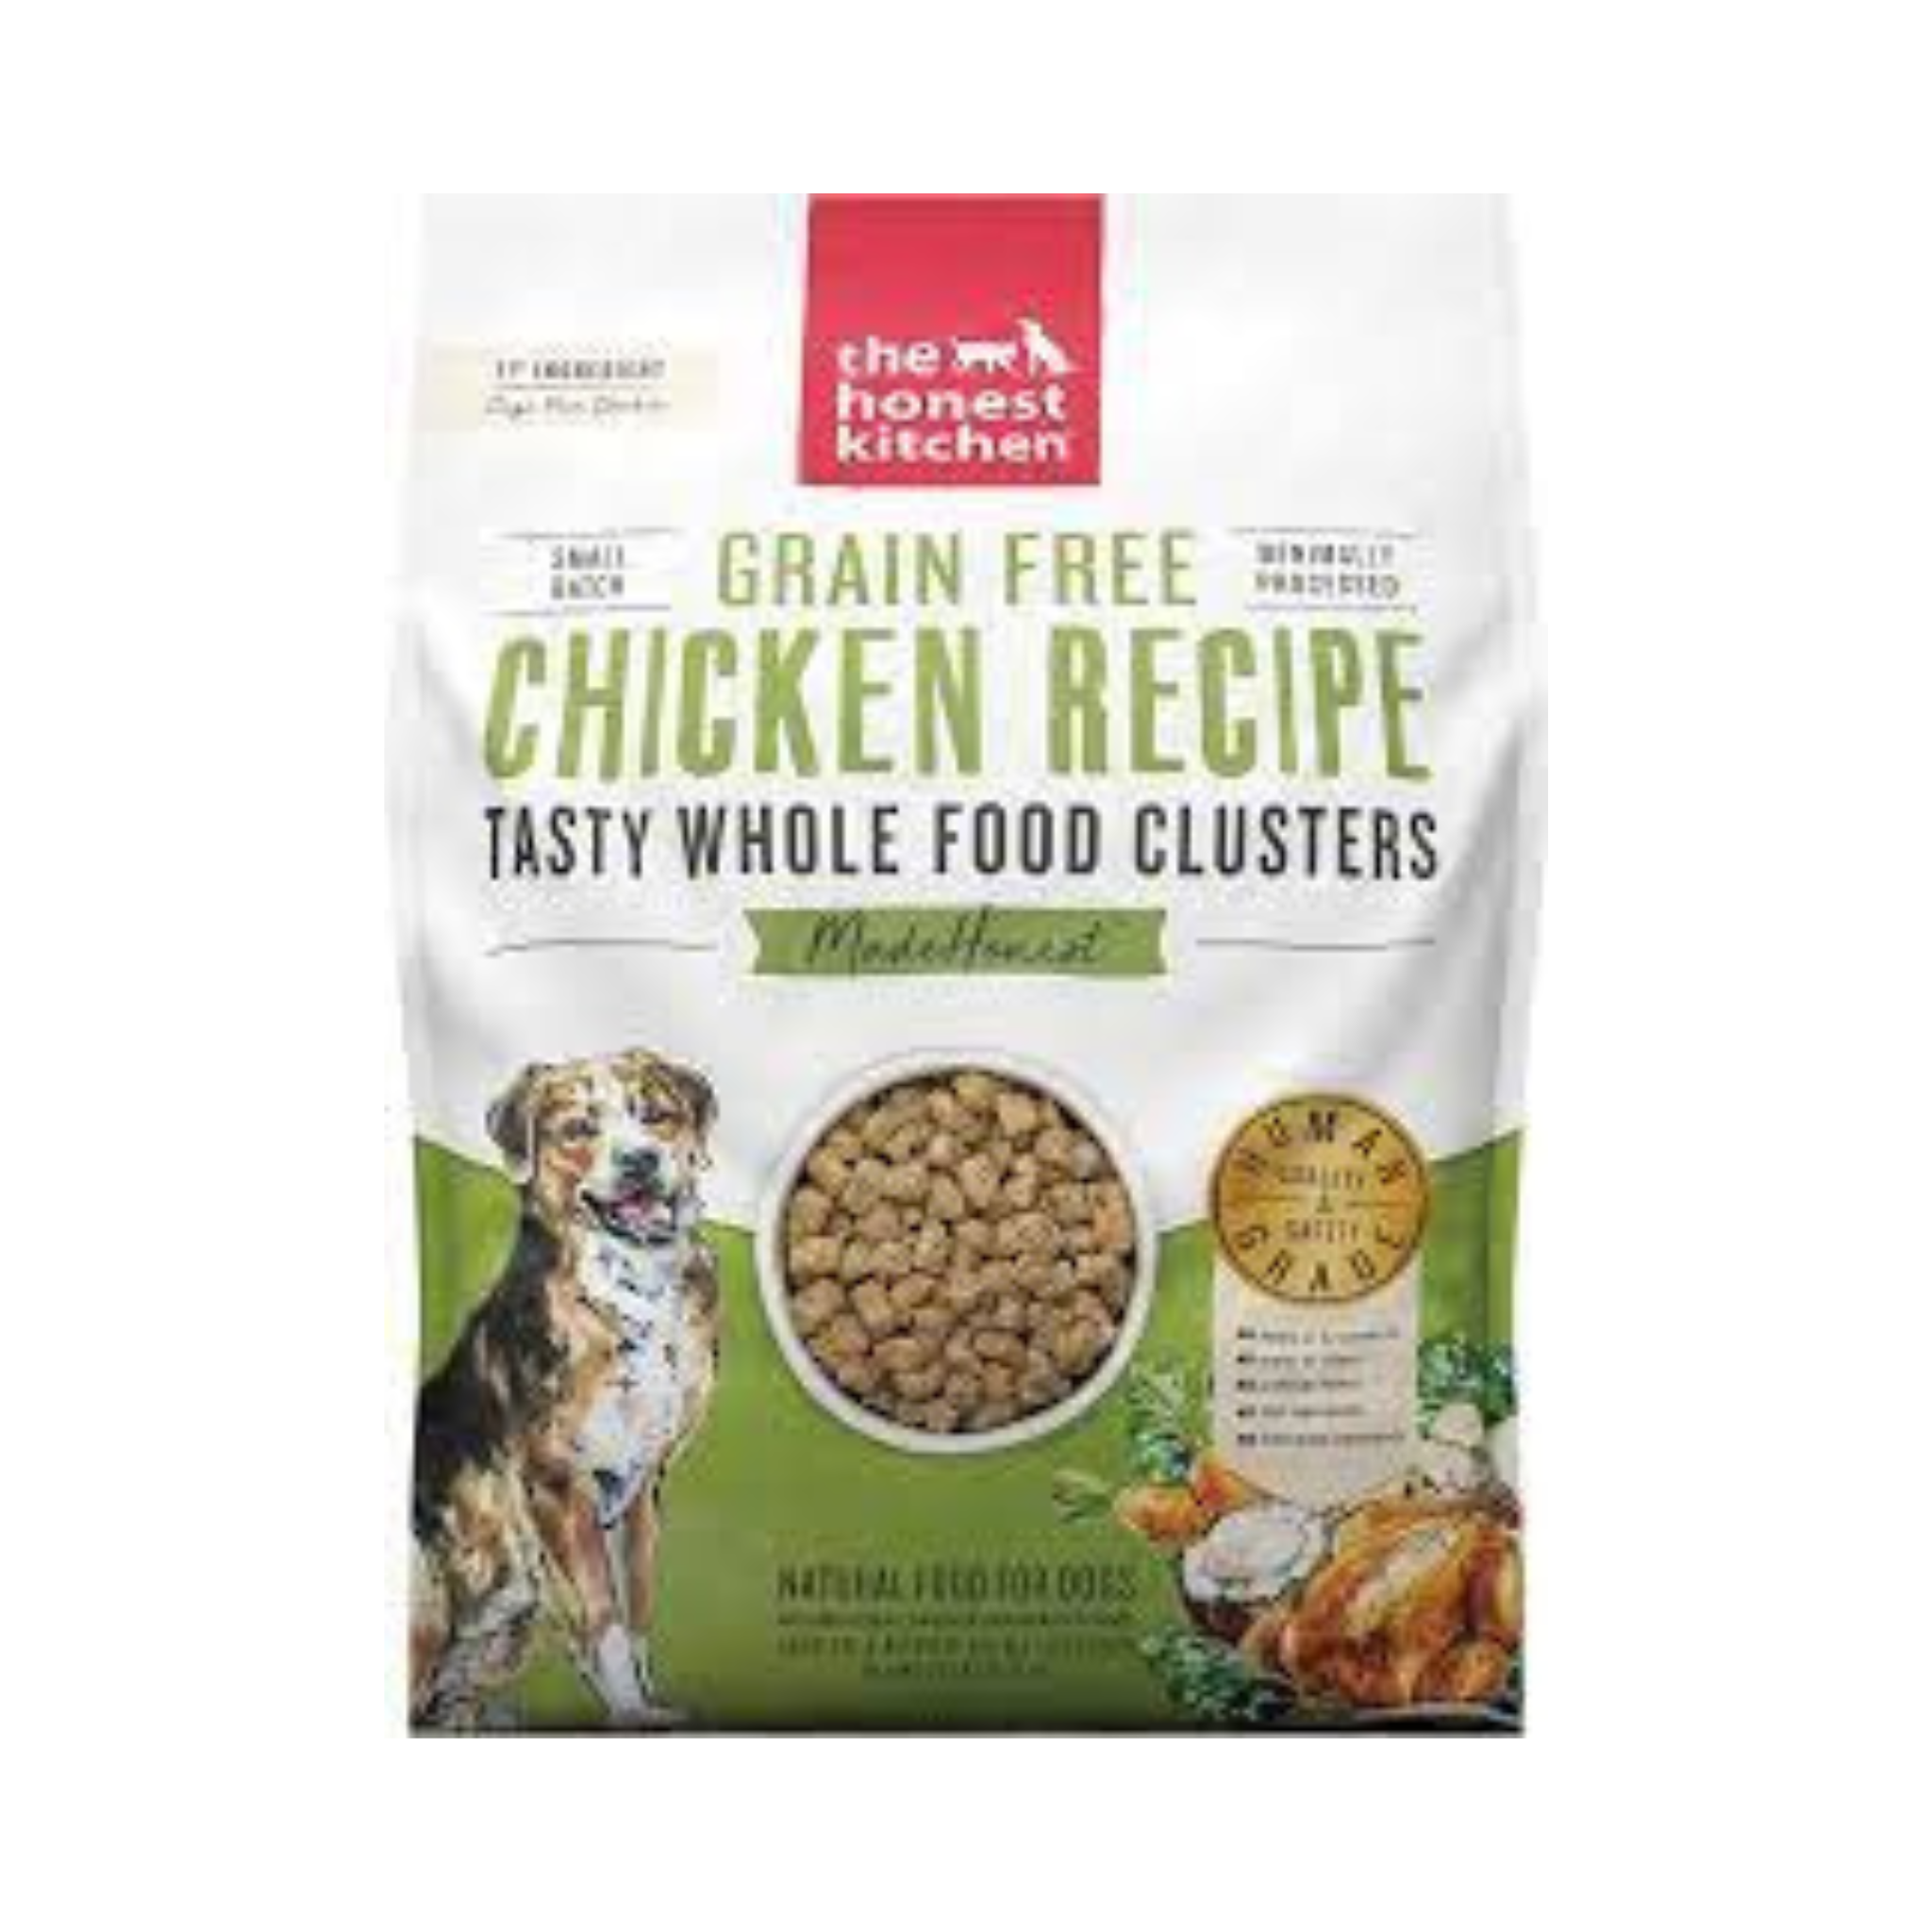 The Honest Kitchen Grain Free Whole Food Clusters Chicken